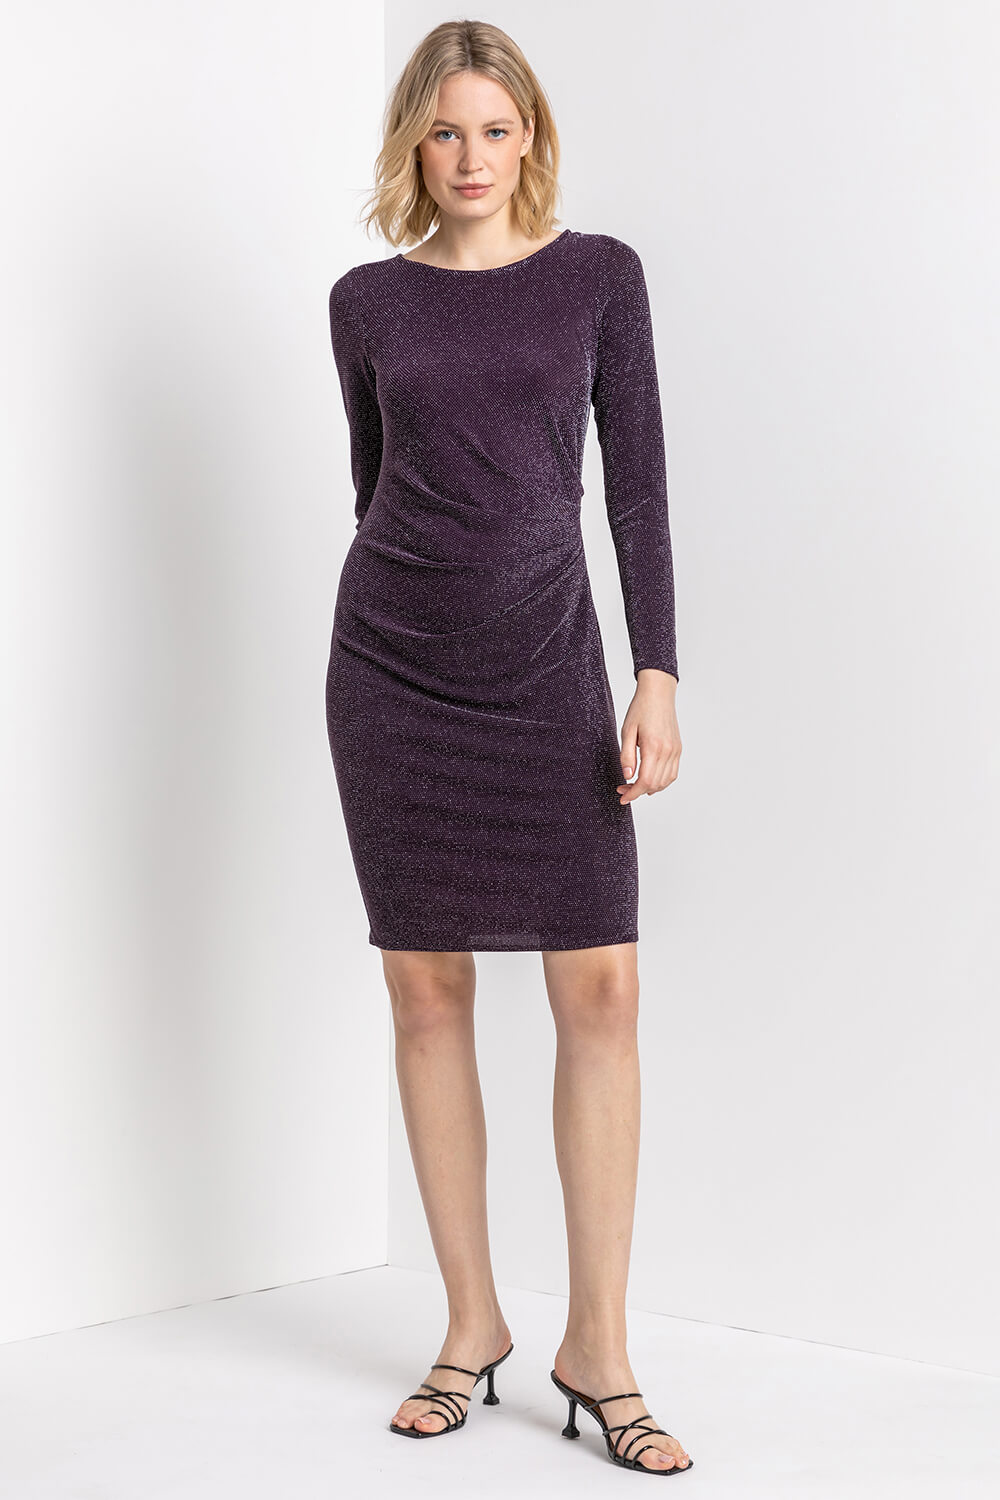 Purple Metallic Shimmer Ruched Dress, Image 3 of 5